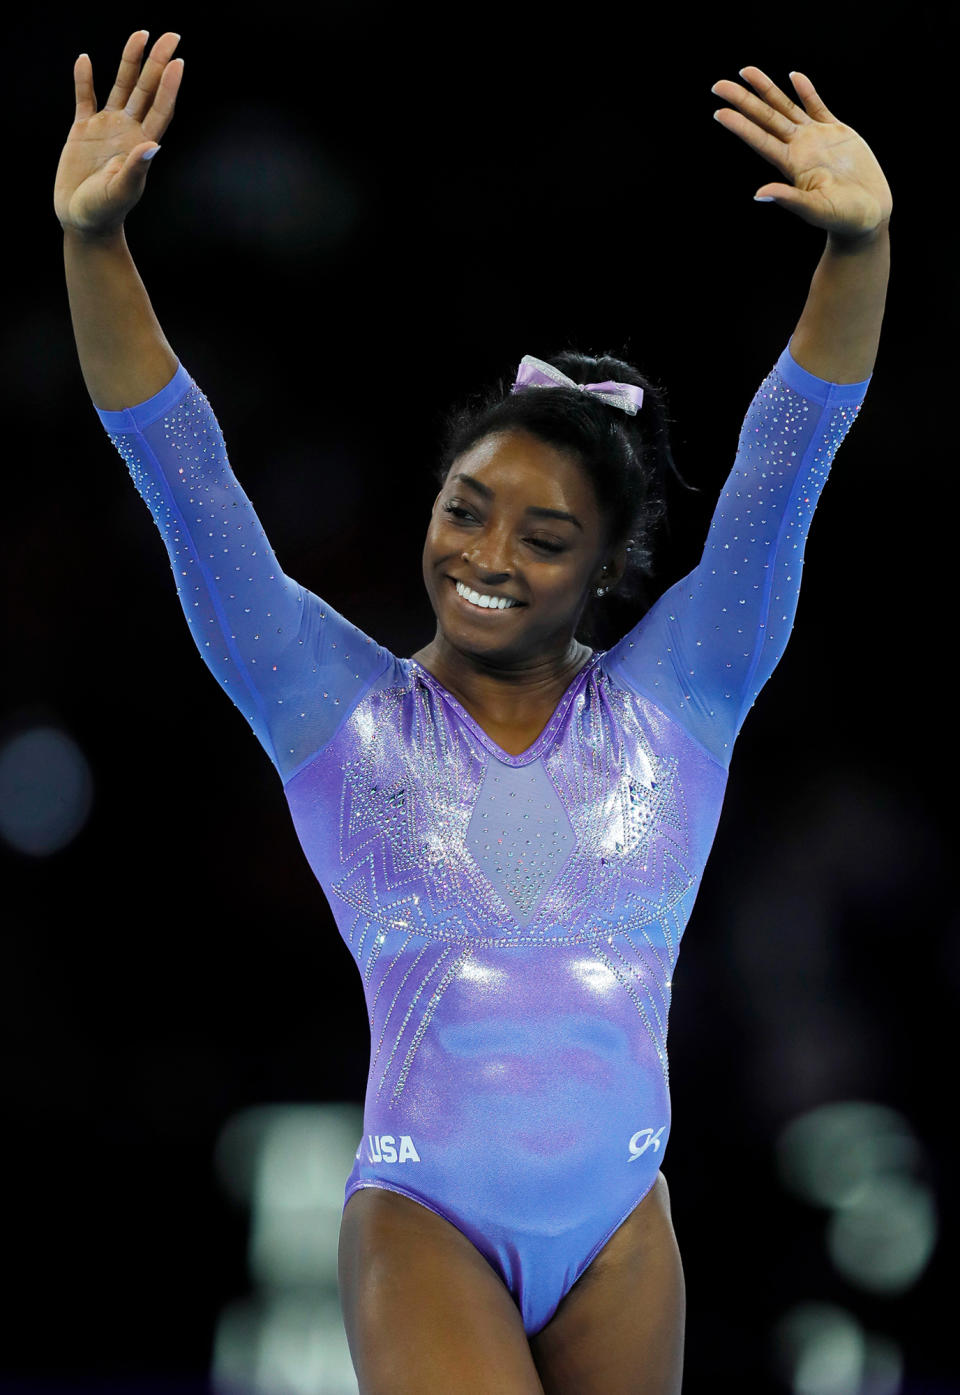 The Olympic gymnast didn't earn gold, silver or bronze on DWTS. She came in fourth place, even though she was the only contestant to earn a perfect 80 the week of her elimination.